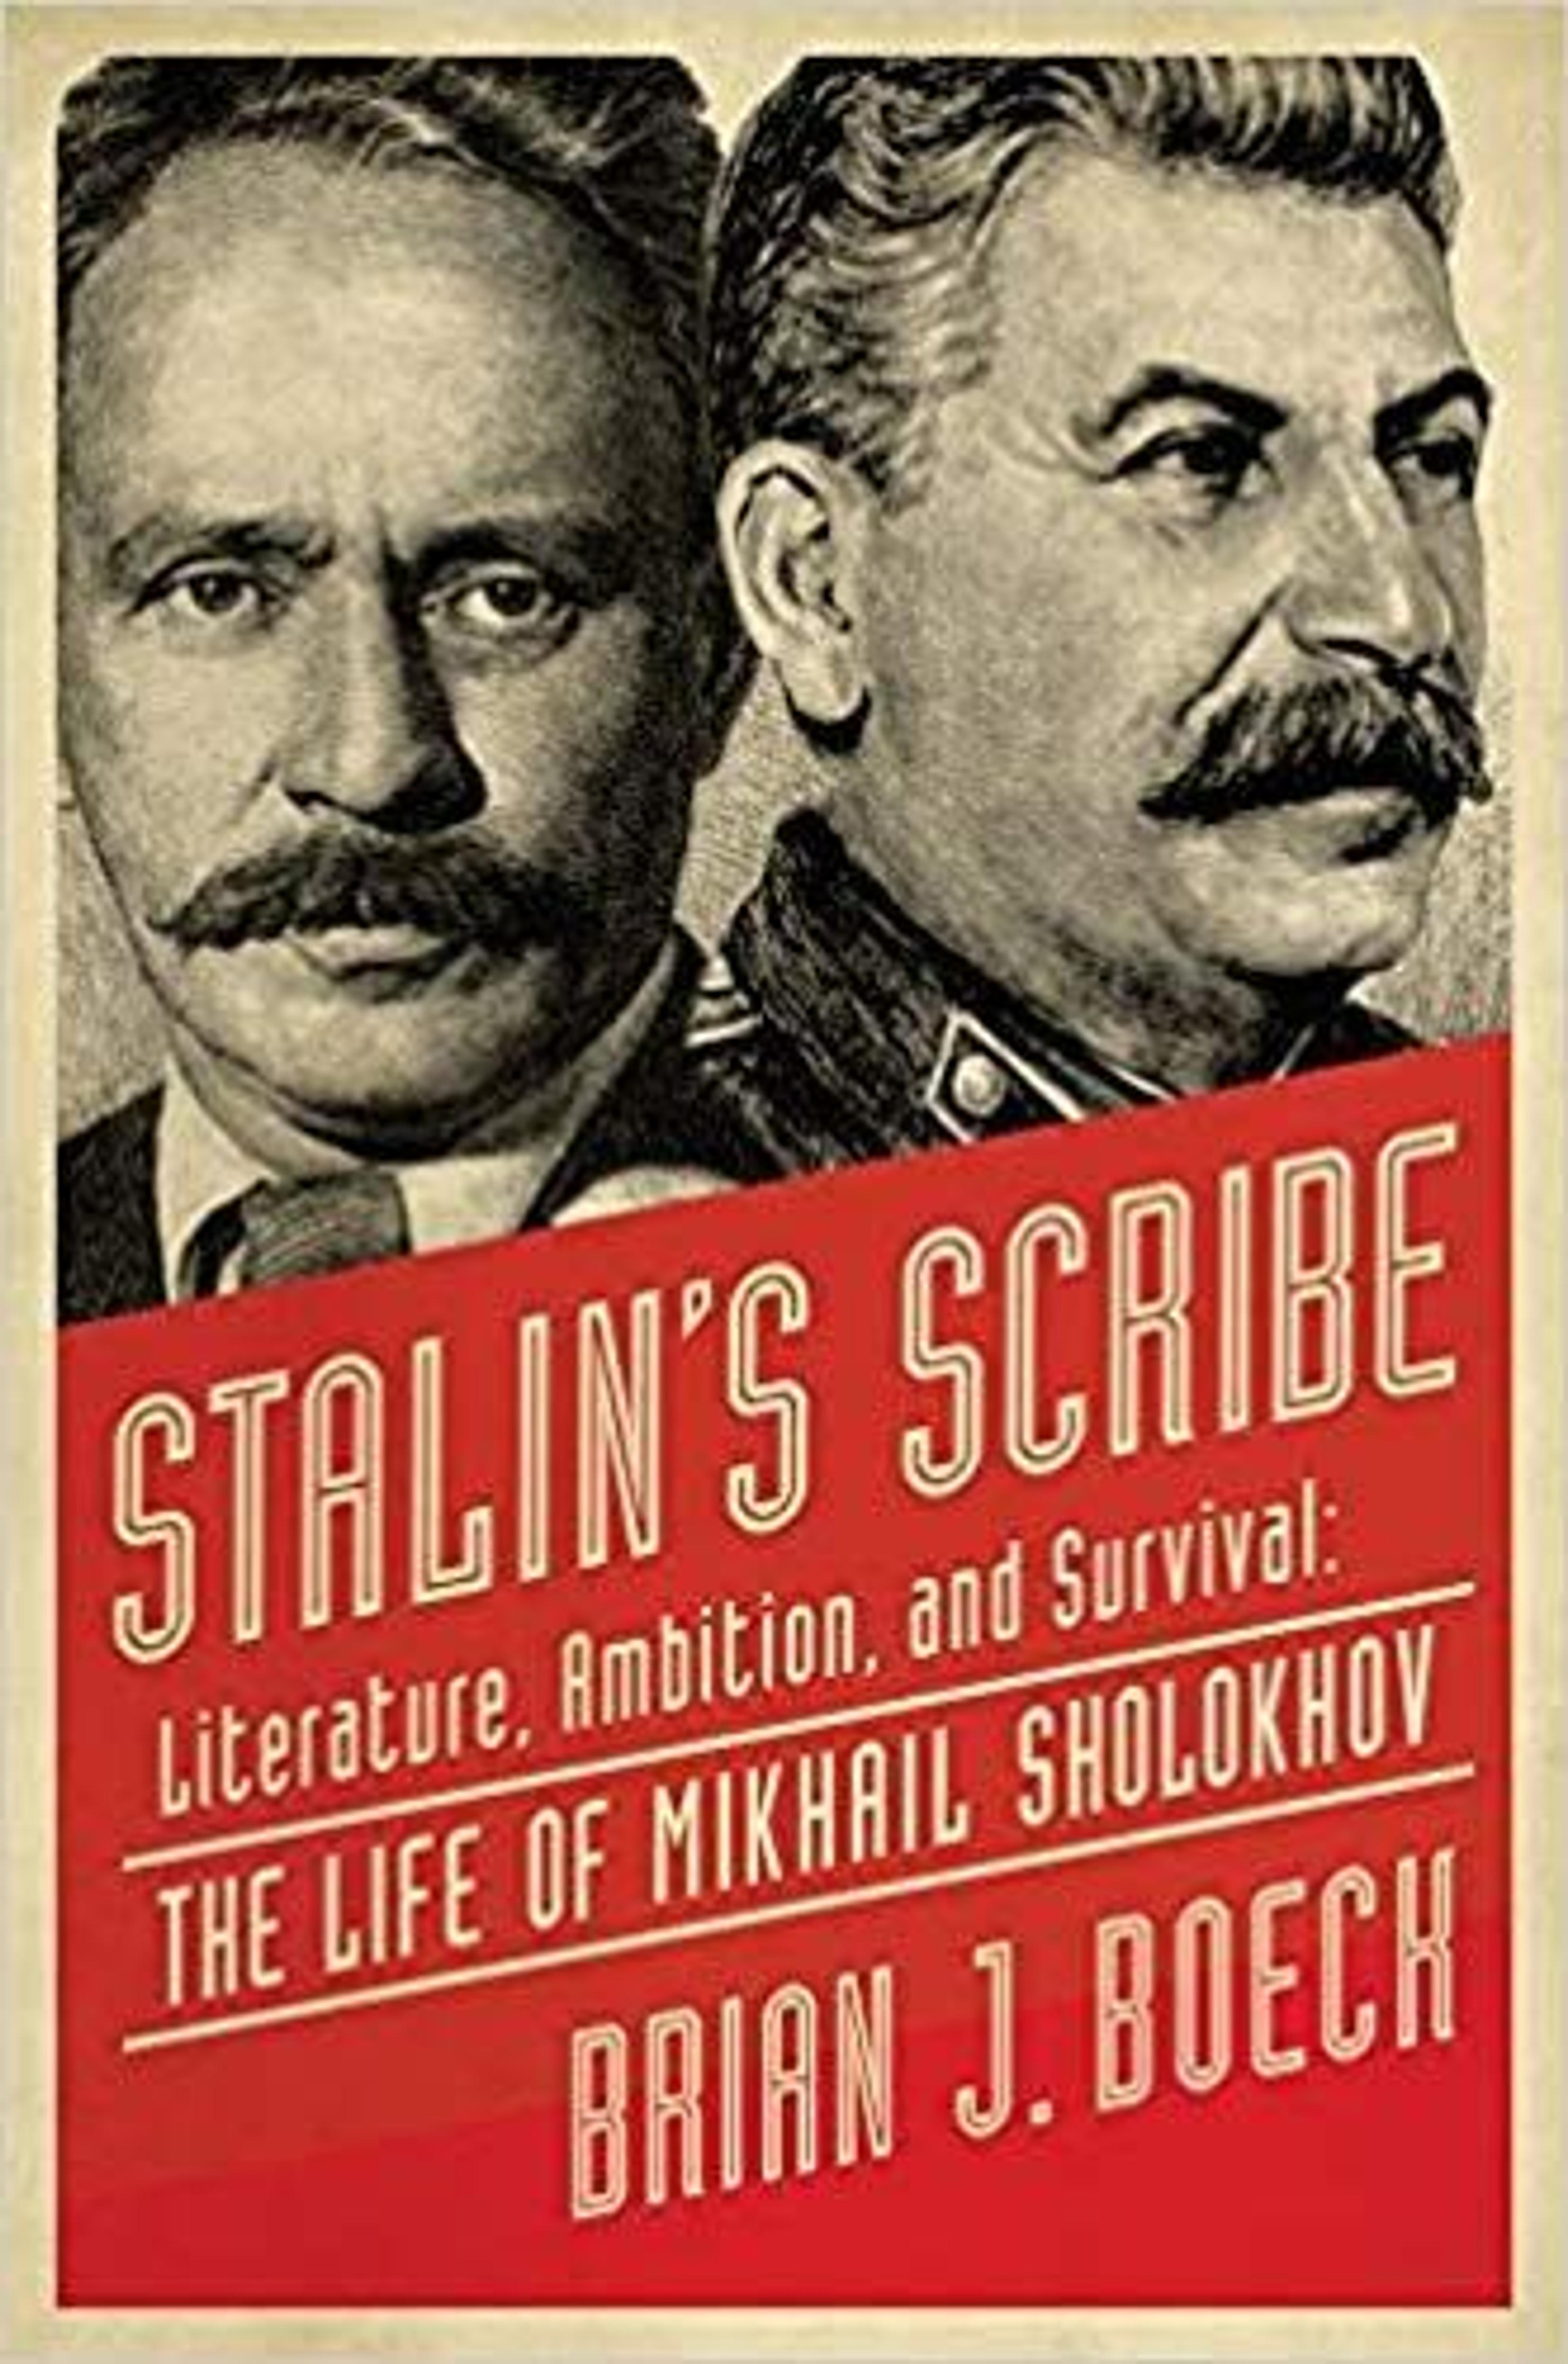 The Black Disk of the Sun: On Brian J. Boeck’s Biography of Mikhail Sholokhov, “Stalin’s Scribe”